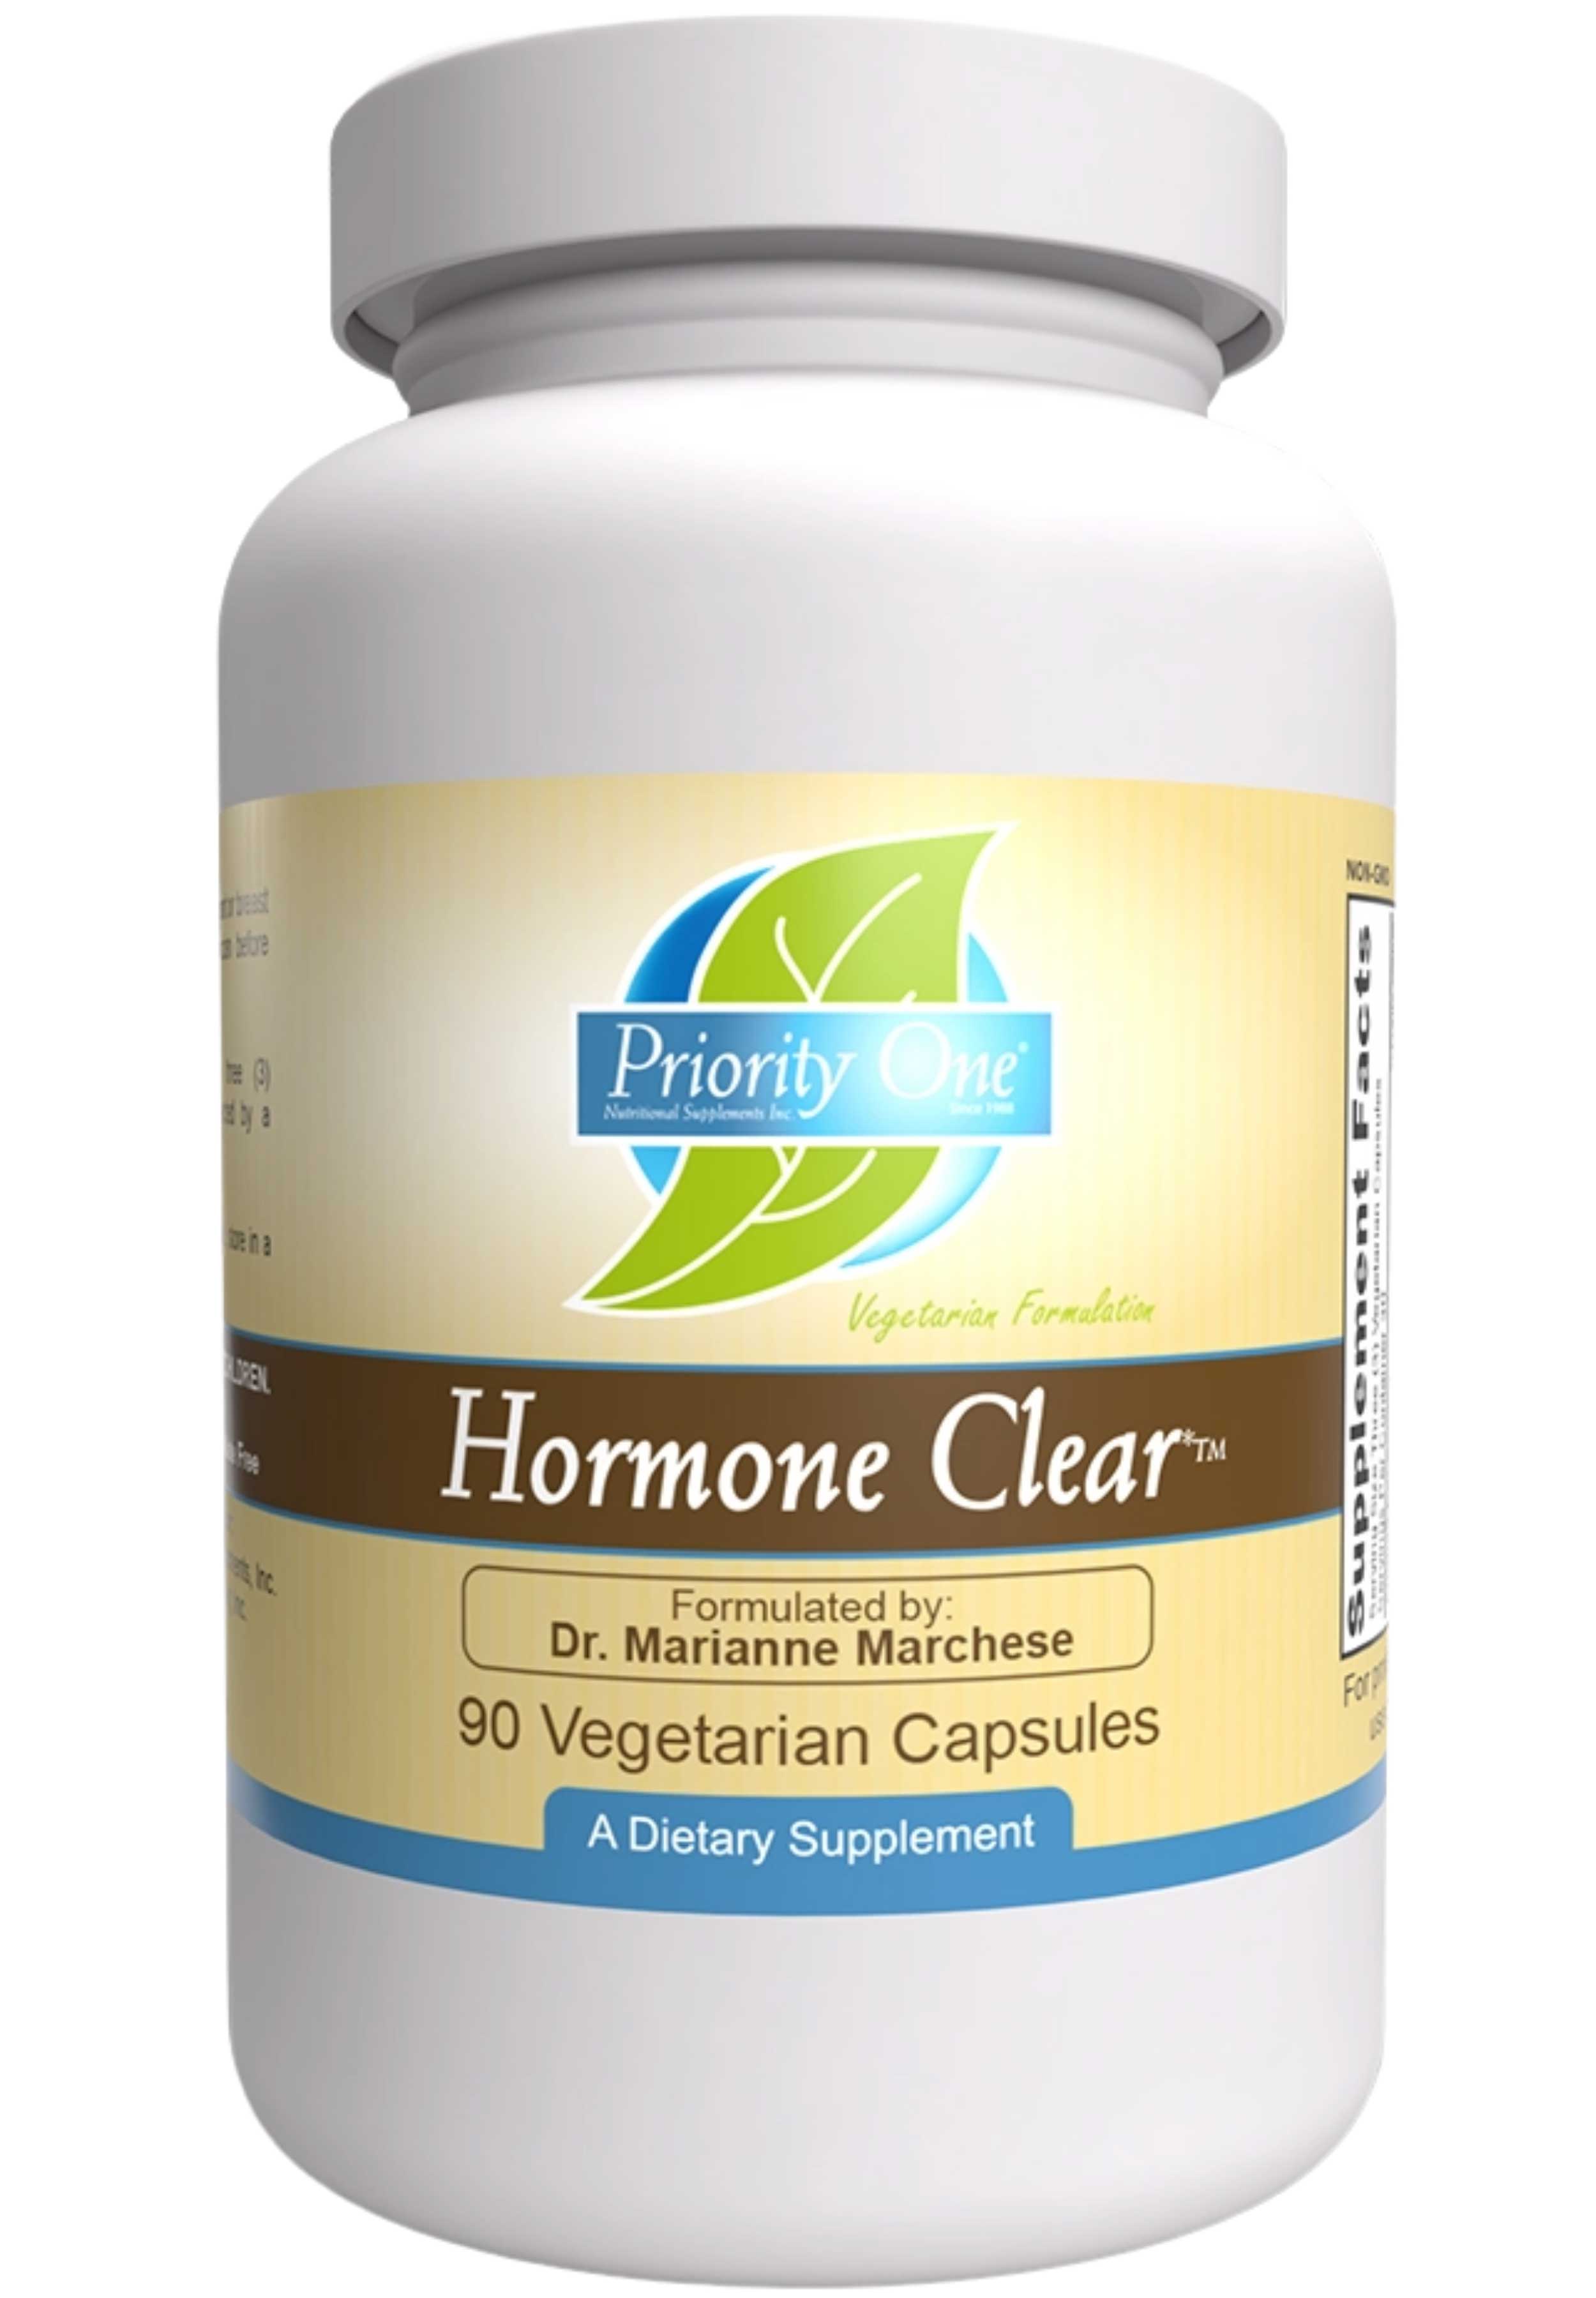 Priority One Hormone Clear